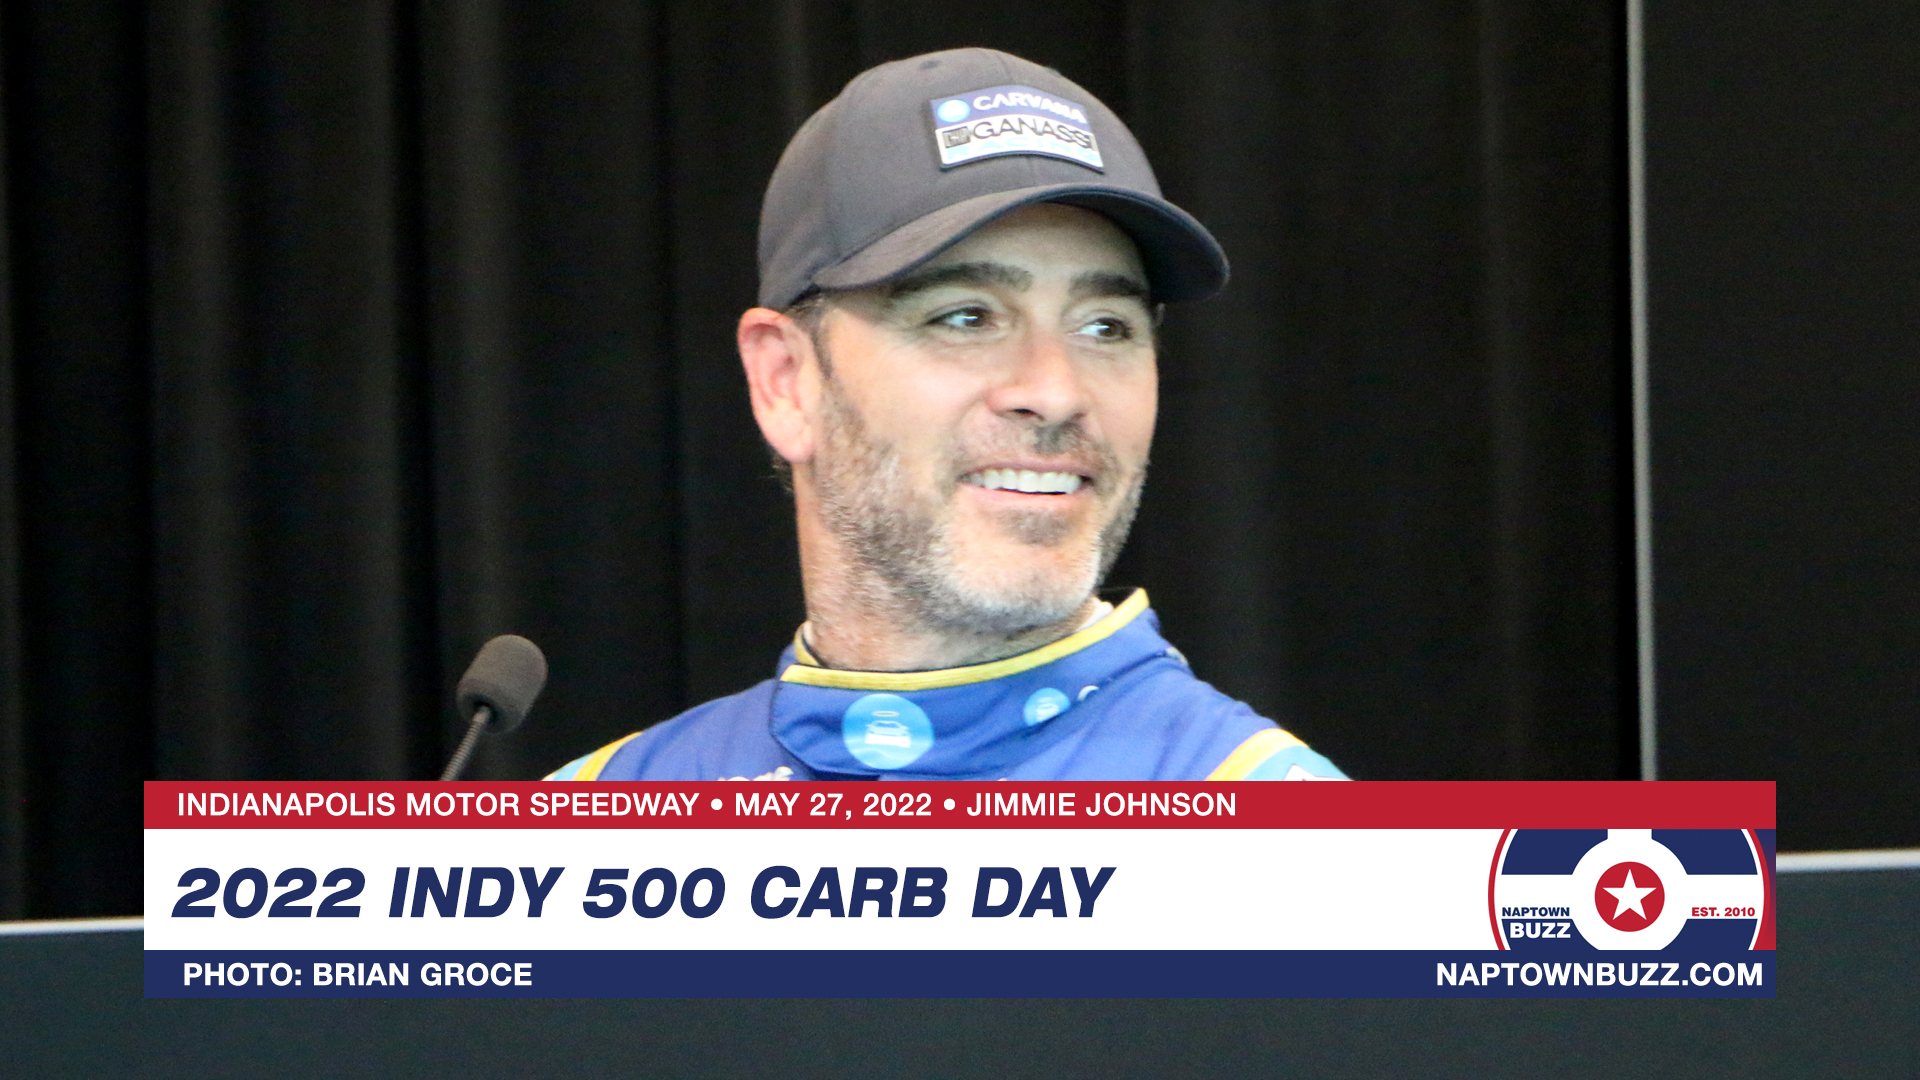 Indy 500 Carb Day May 27, 2022 Jimmie Johnson